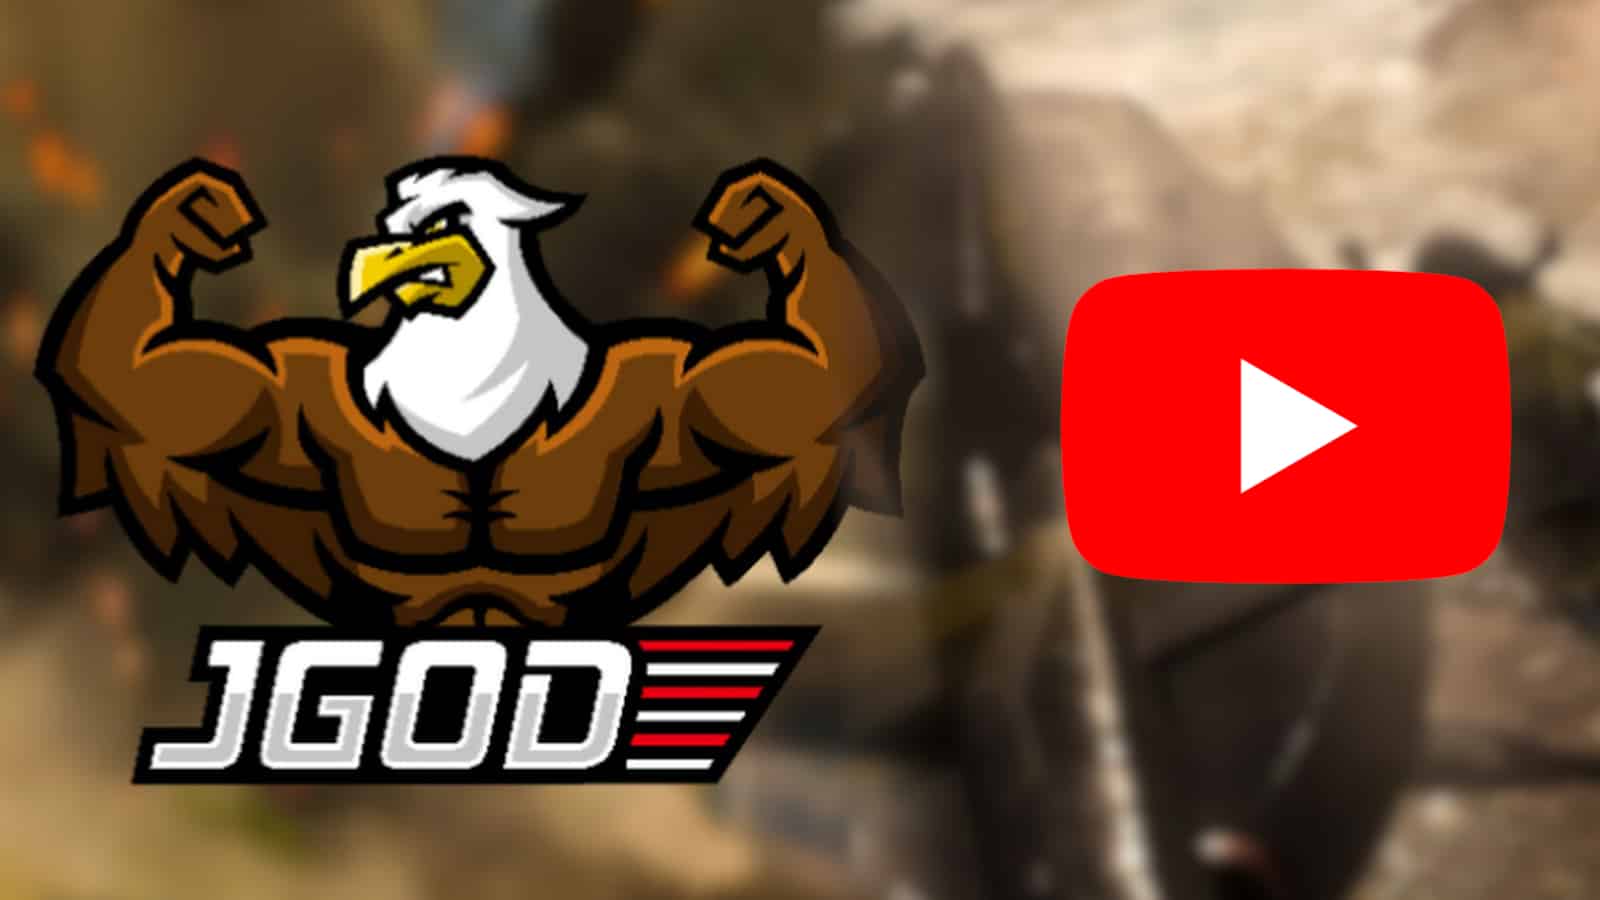 jgod youtube warzone channel removal back